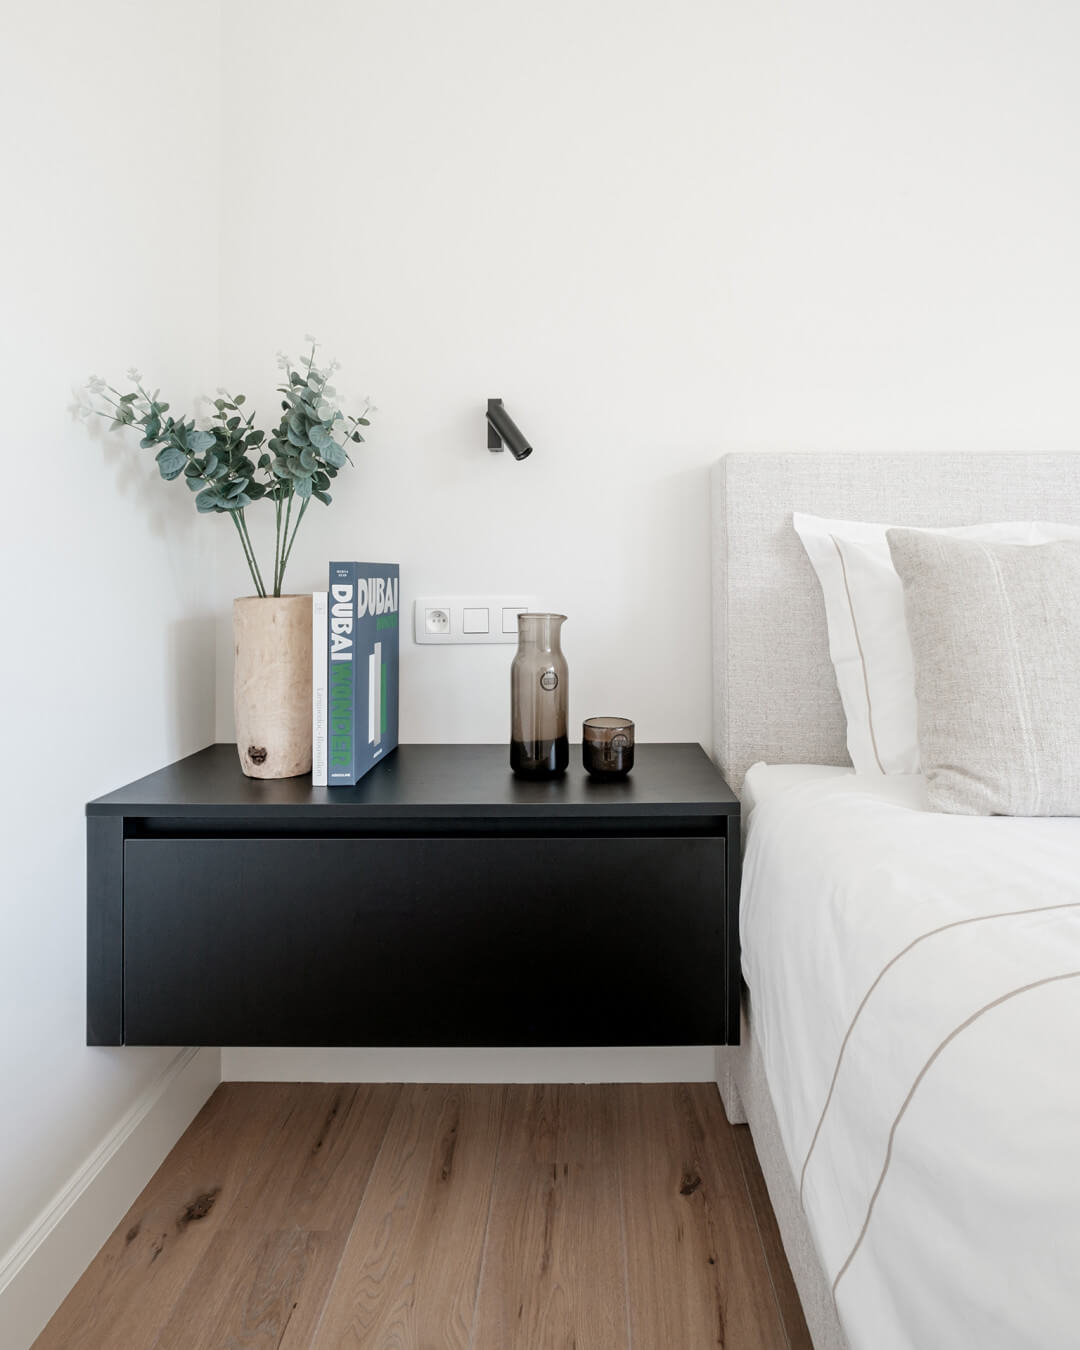 Made-to-measure bedside table from Maatkasten Online, in the colour Elegant Black